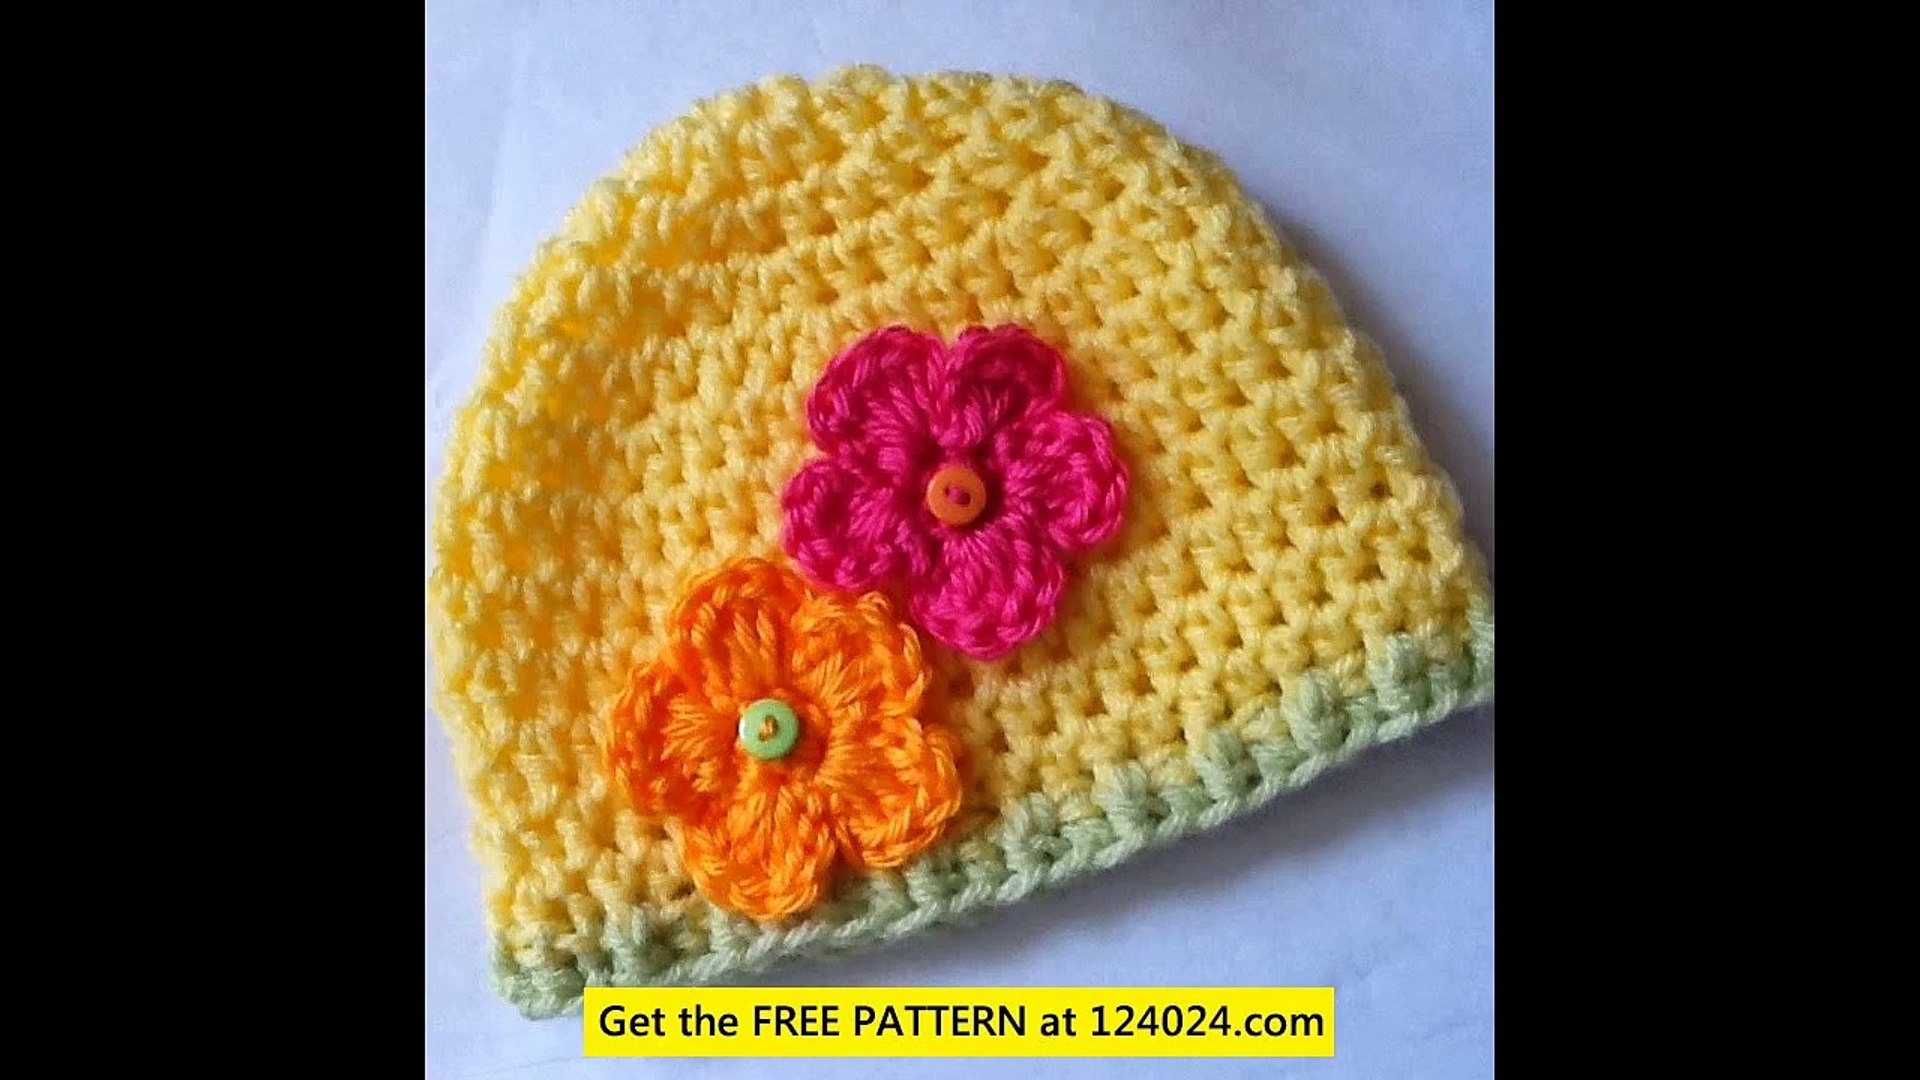 Free Crochet Pattern For Mickey Mouse Hat Cute Crochet Ba Hats Crochet Ba Hat Patterns Free Crochet